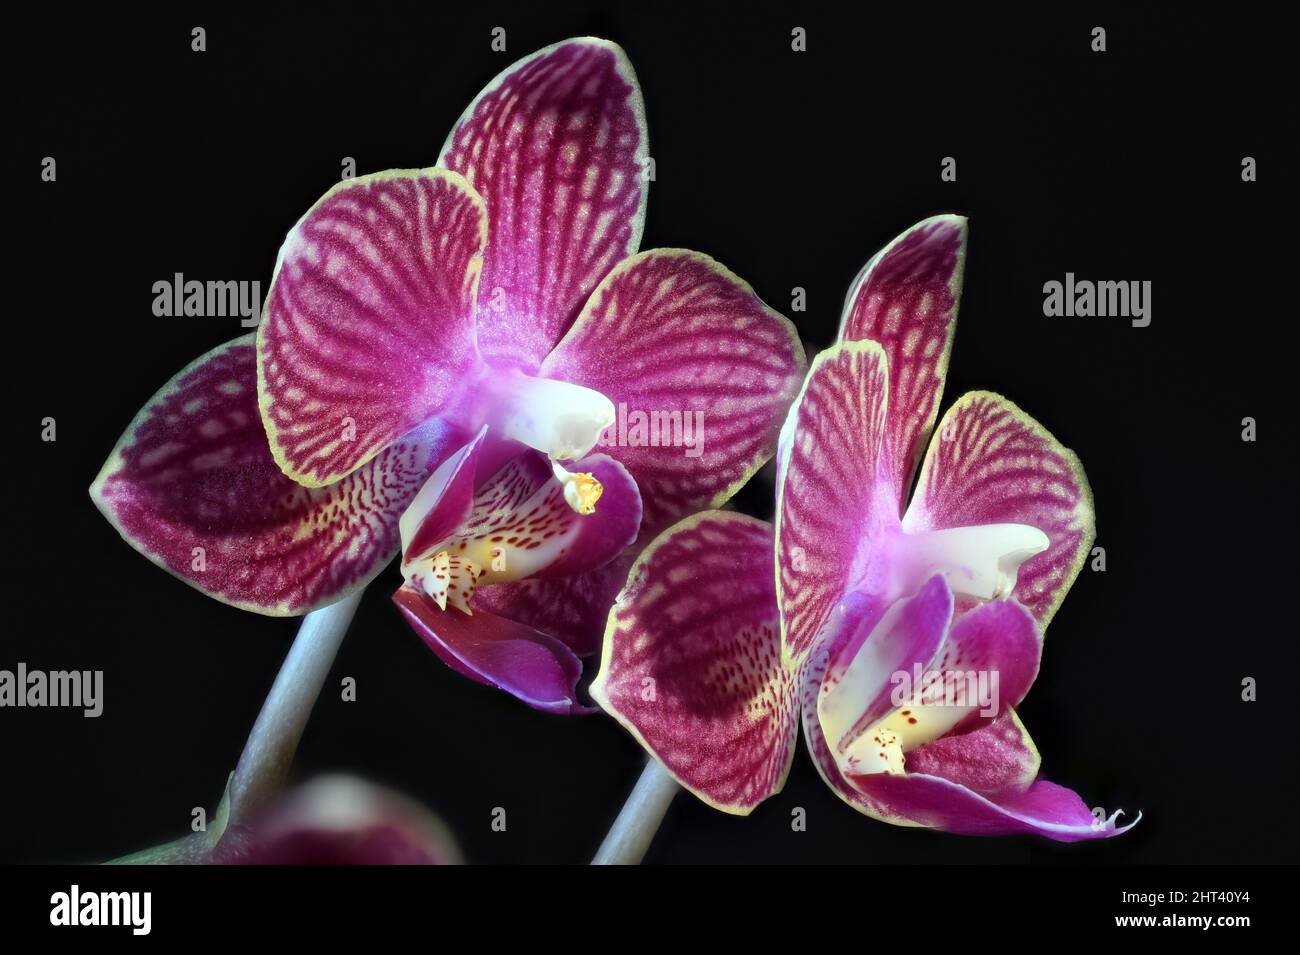 Miniature Variegated Pink Orchid on black background Stock Photo